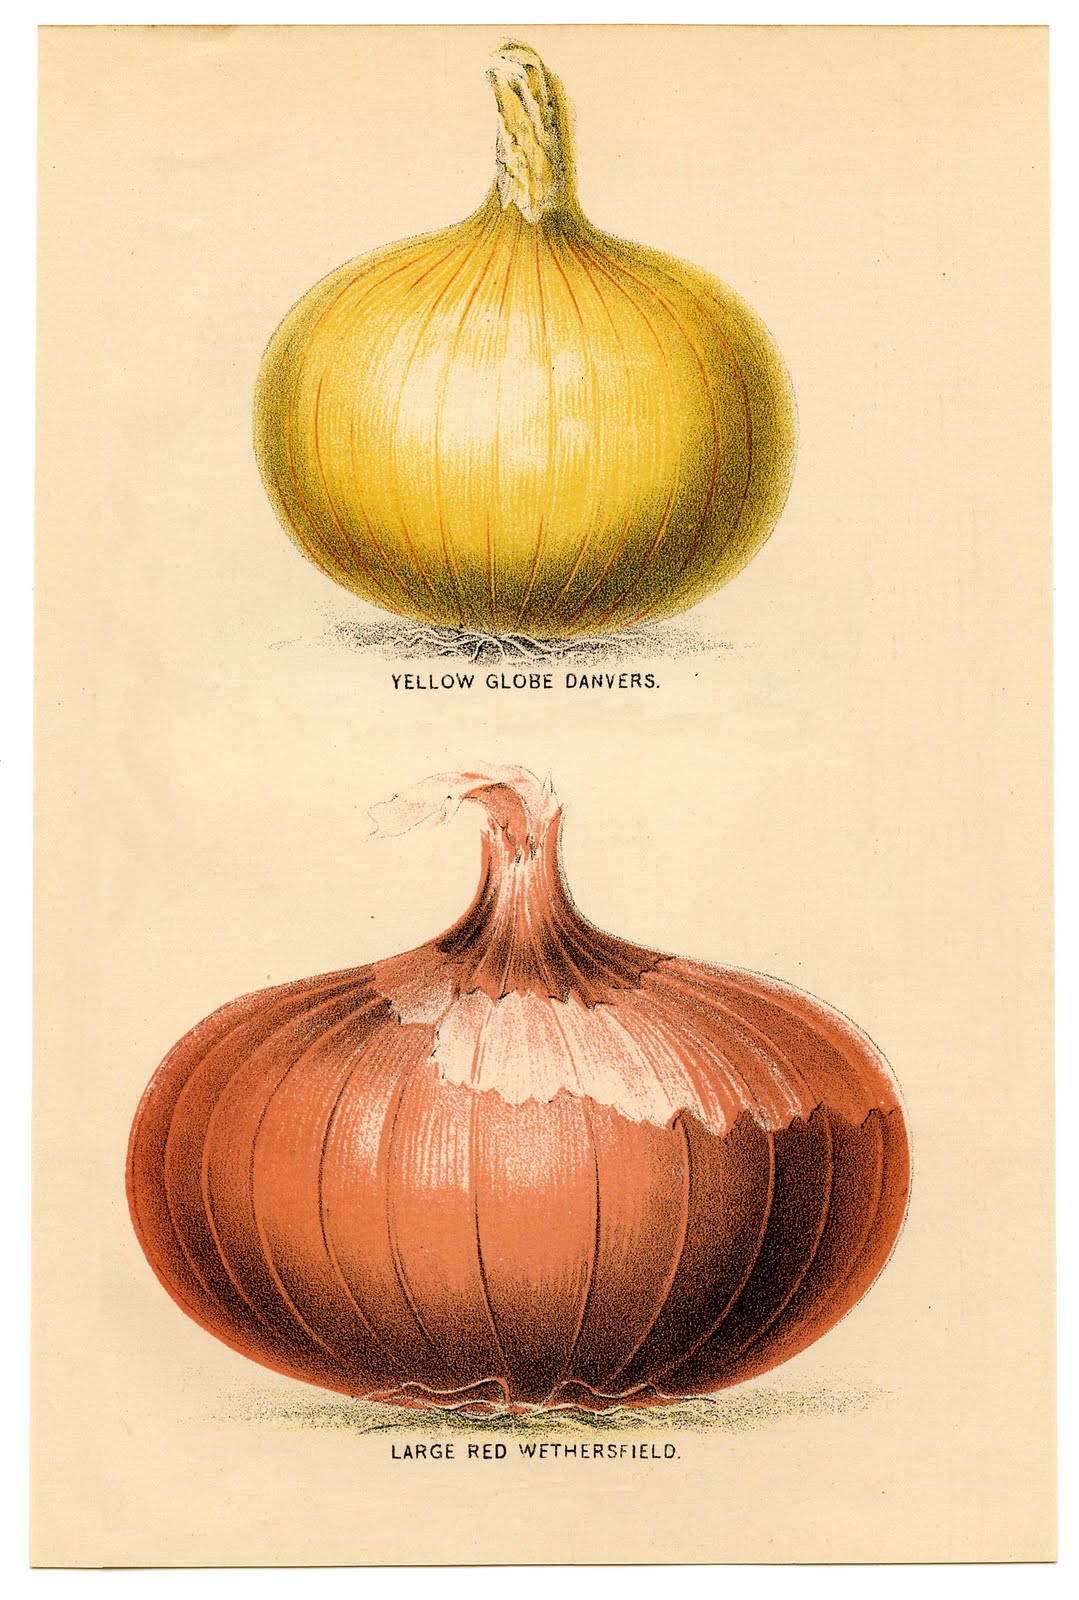 Instant Art Printable - Vintage Onions - The Graphics Fairy